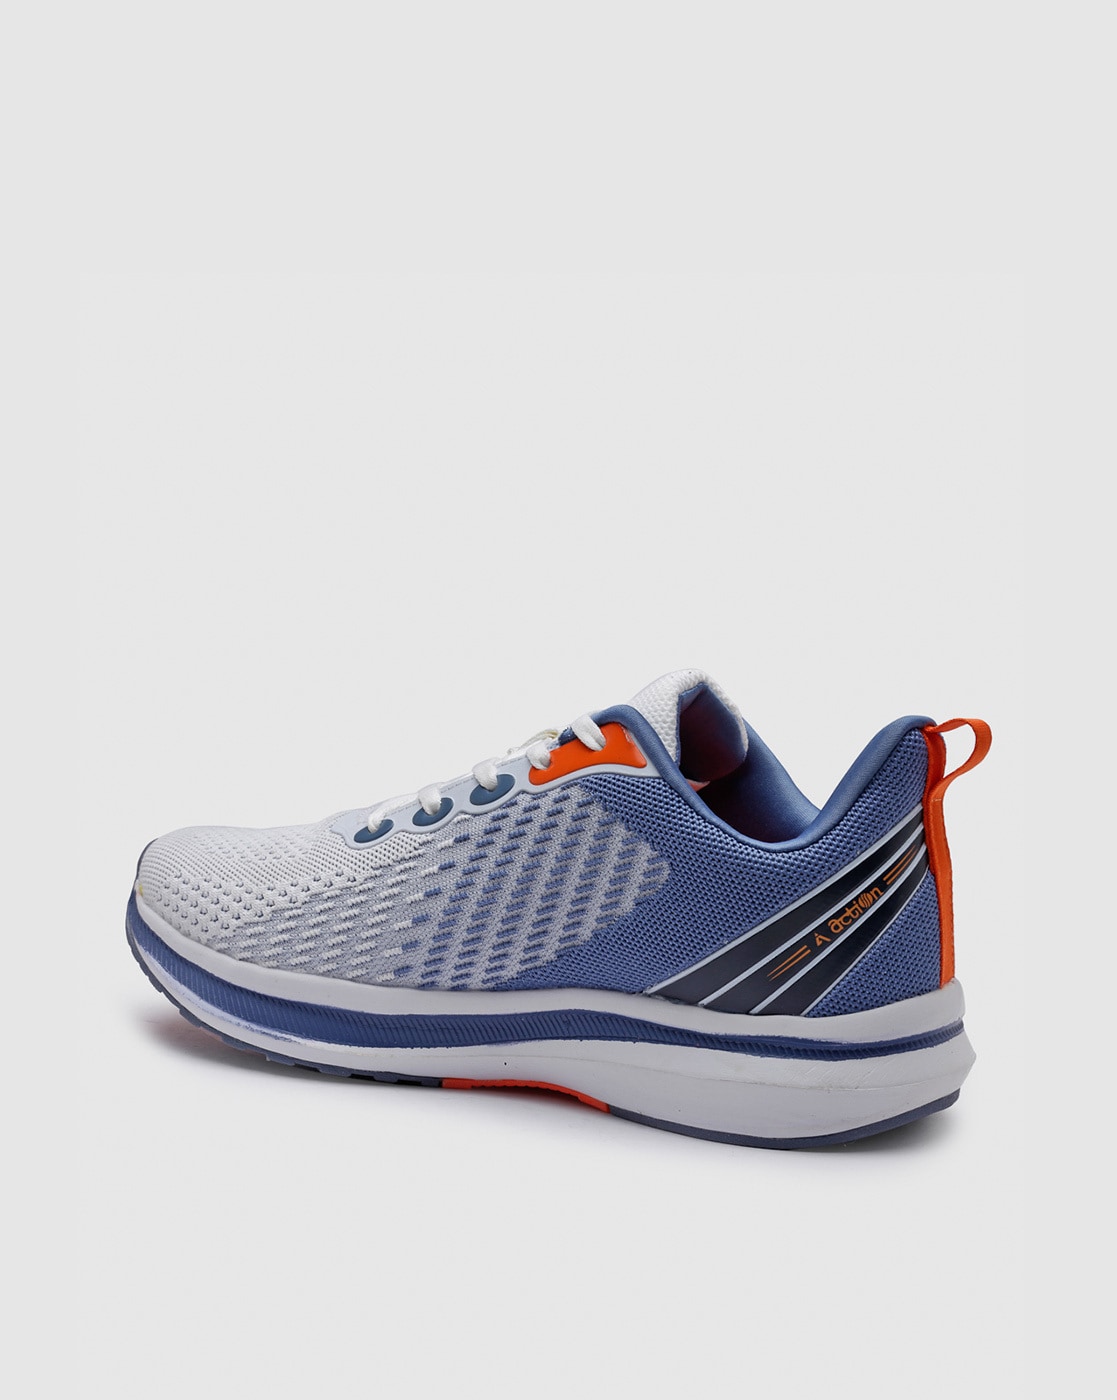 Action White Sports Shoes - Buy Action White Sports Shoes online in India